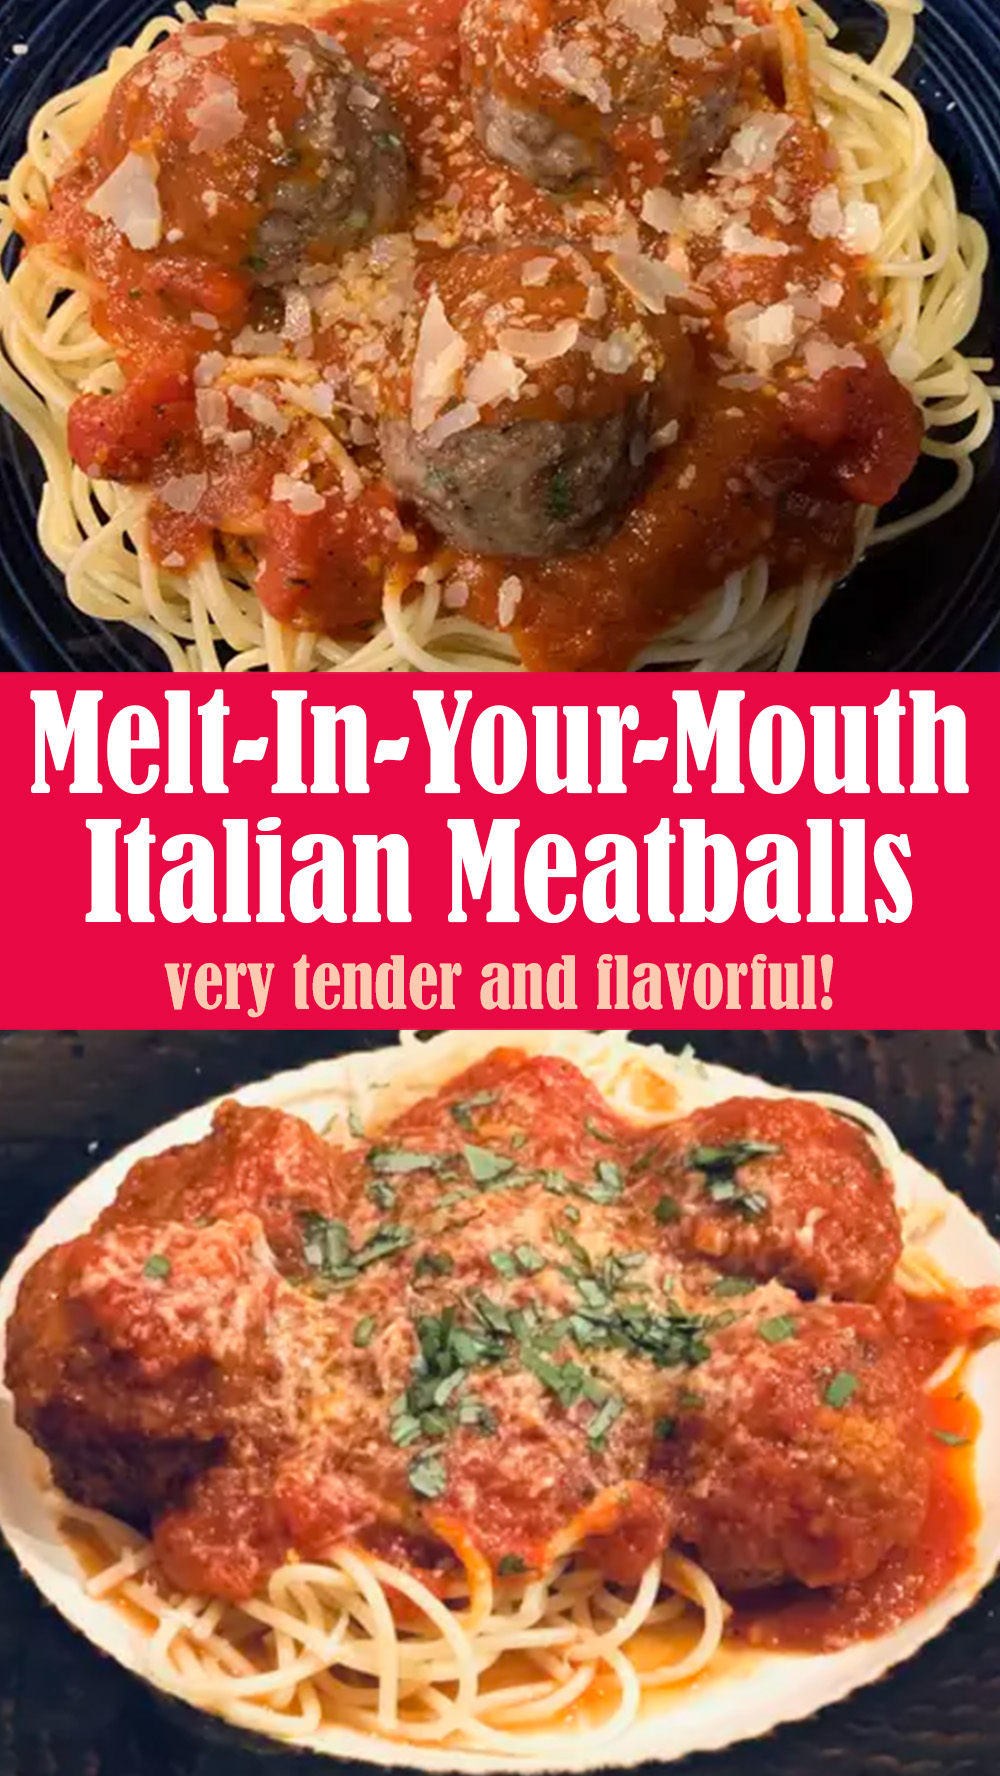 Melt-In-Your-Mouth Italian Meatballs Recipe